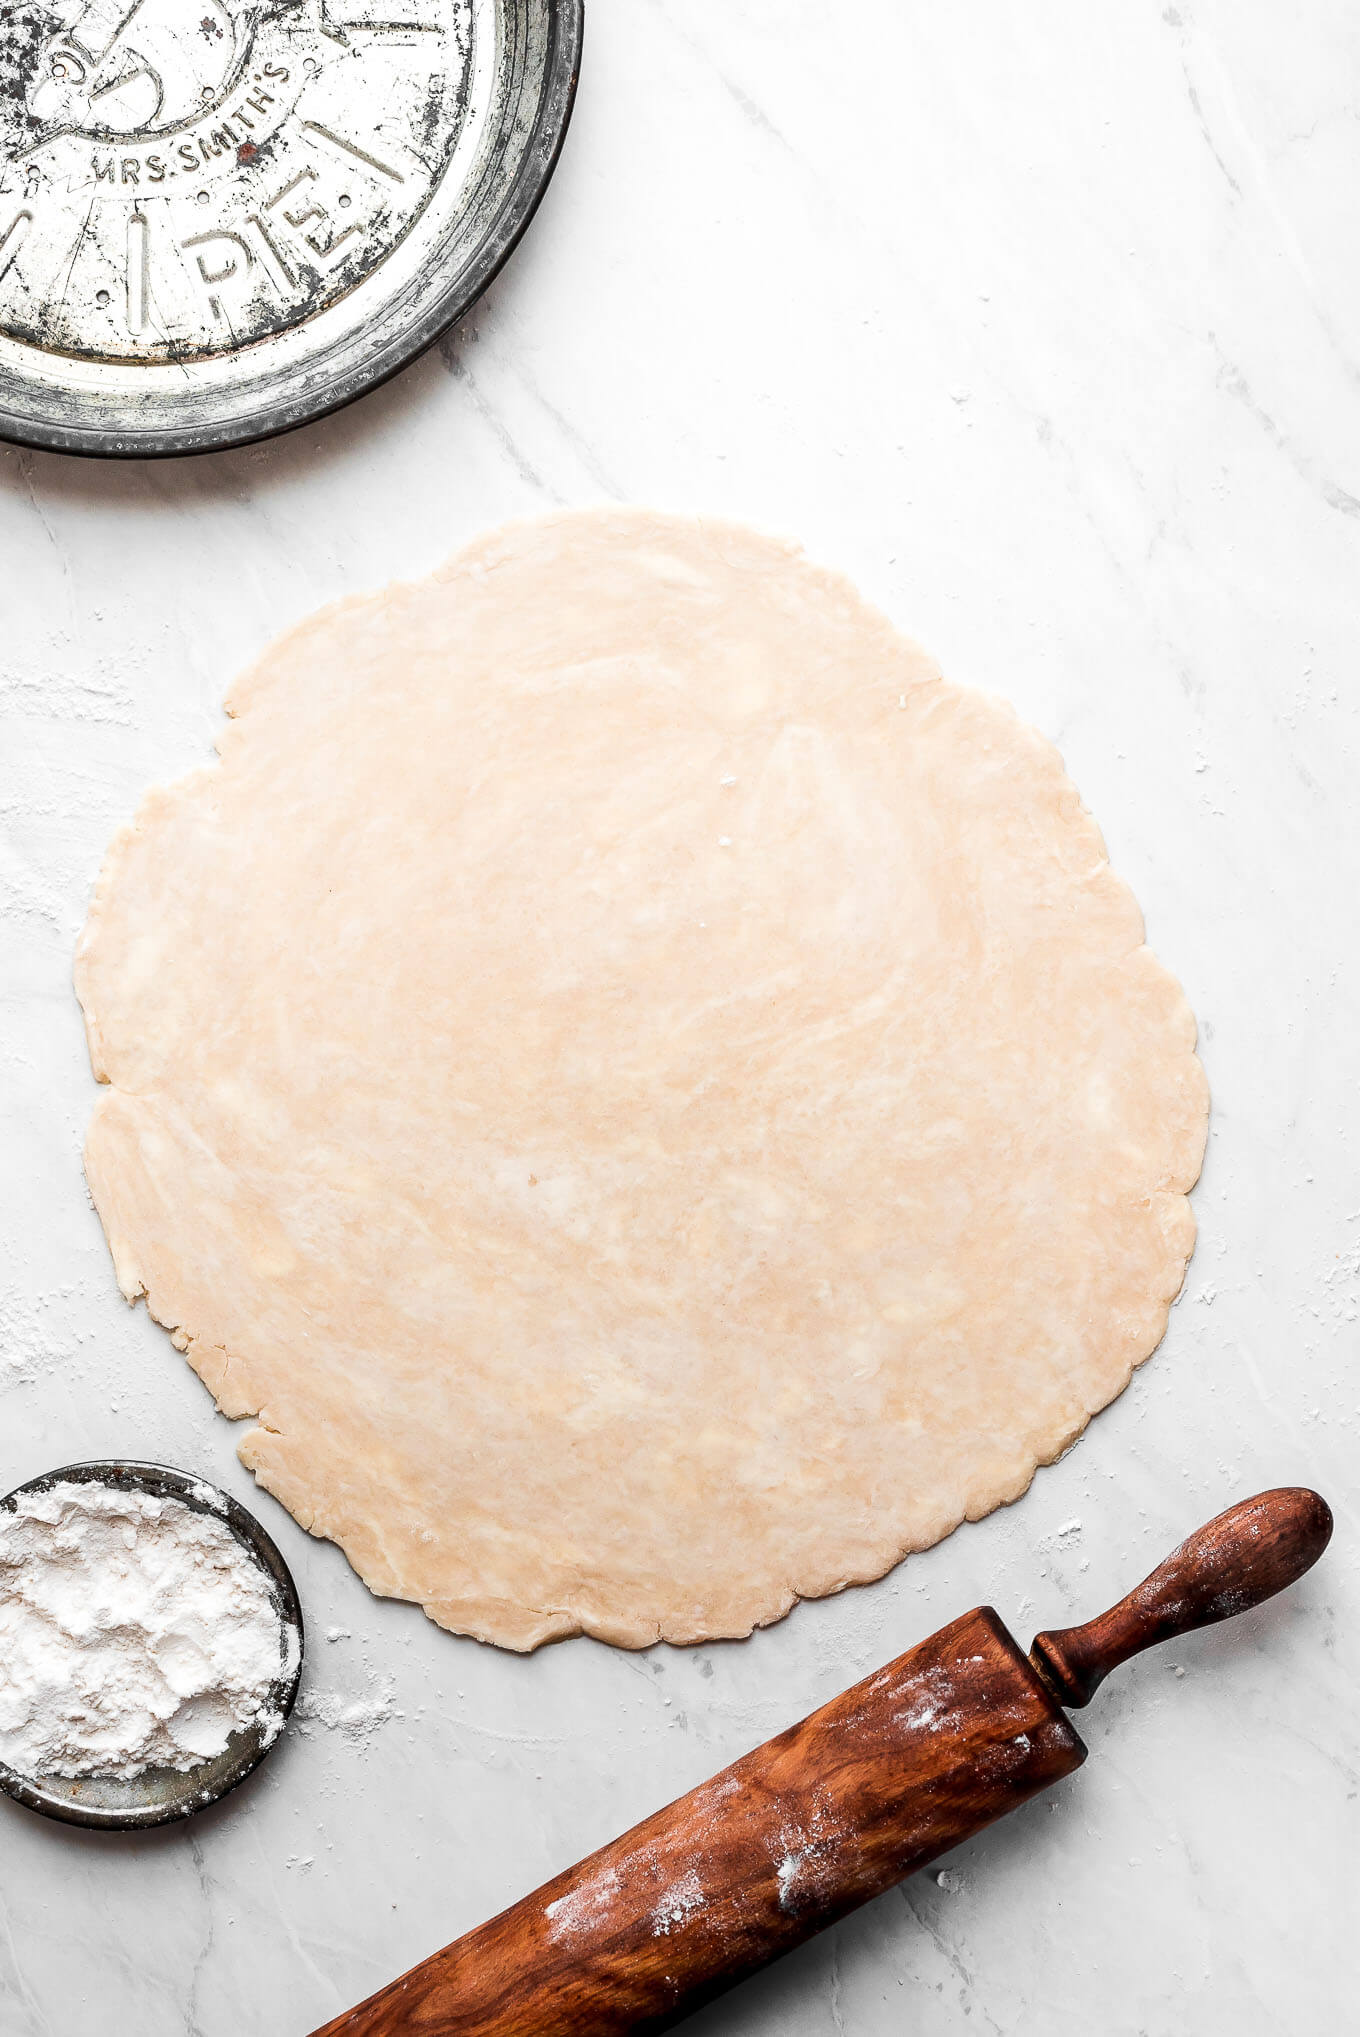 Roll out dough for making homemade pie crust and a rolling pin, pie tin, and dish of flour to the side.